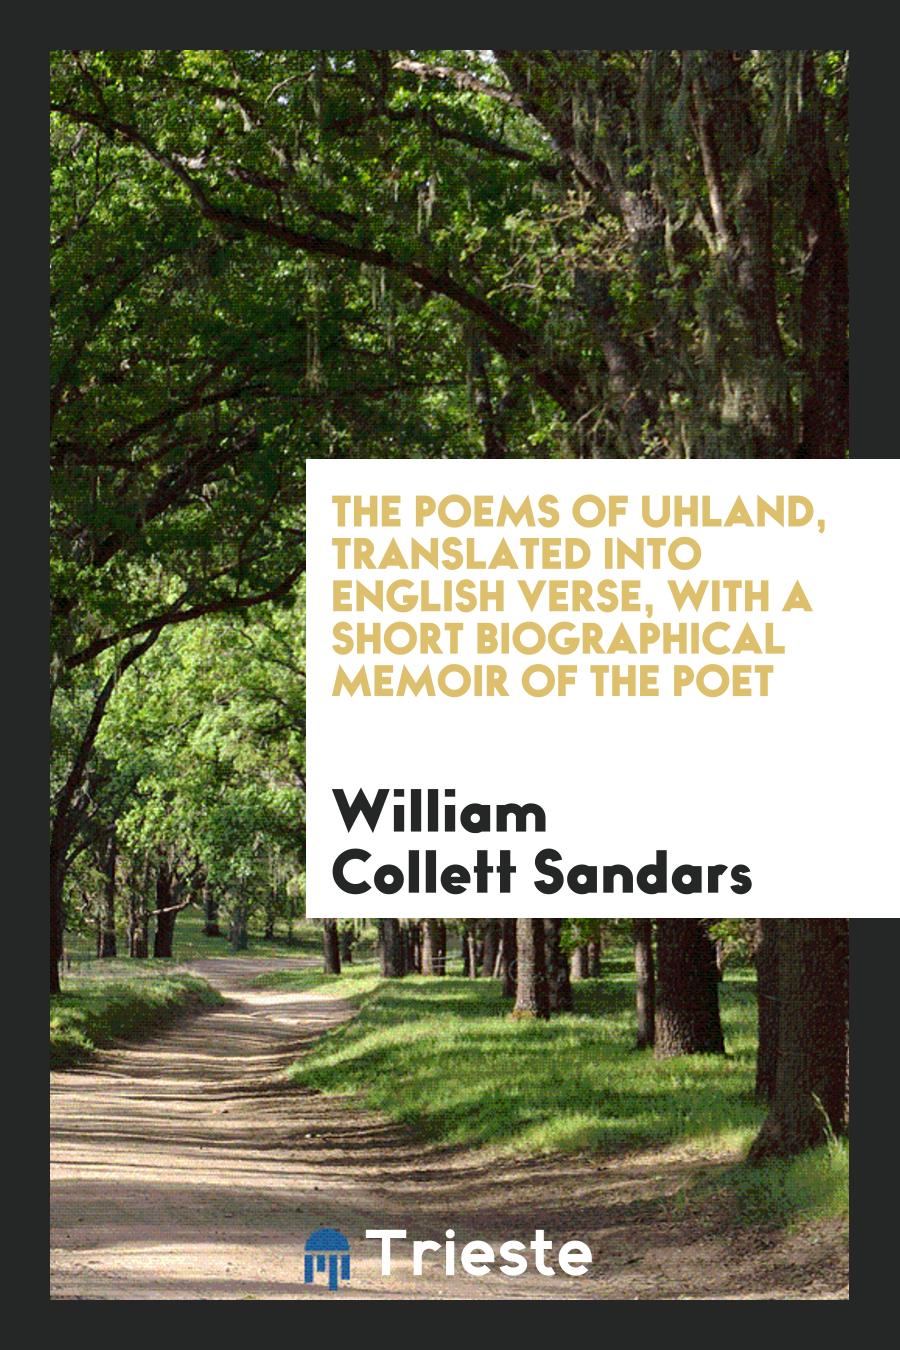 The Poems of Uhland, Translated into English Verse, with a Short Biographical Memoir of the Poet